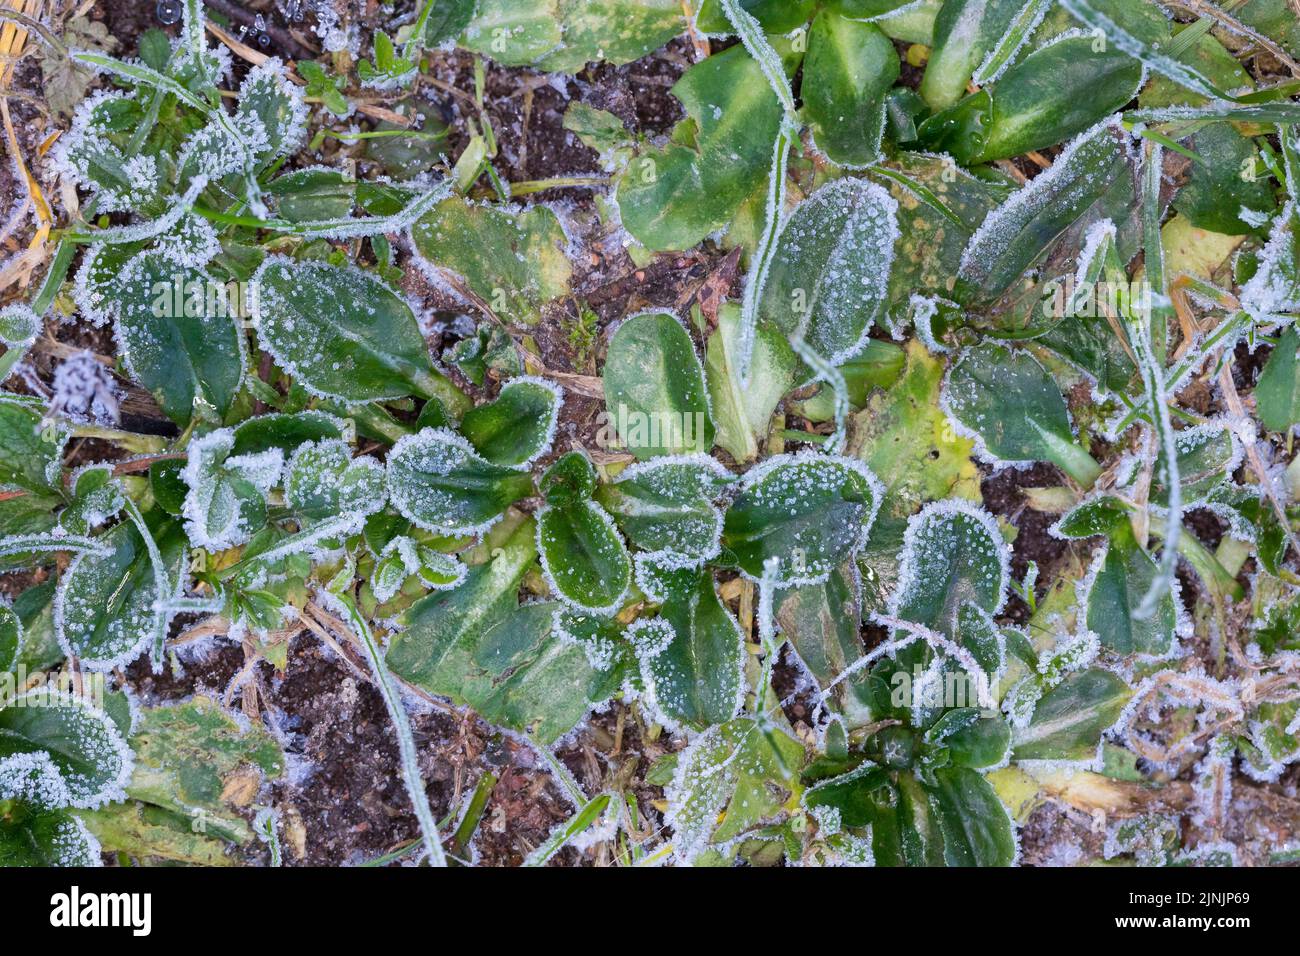 common daisy, lawn daisy, English daisy (Bellis perennis), leaves with hoar frost, Germany Stock Photo